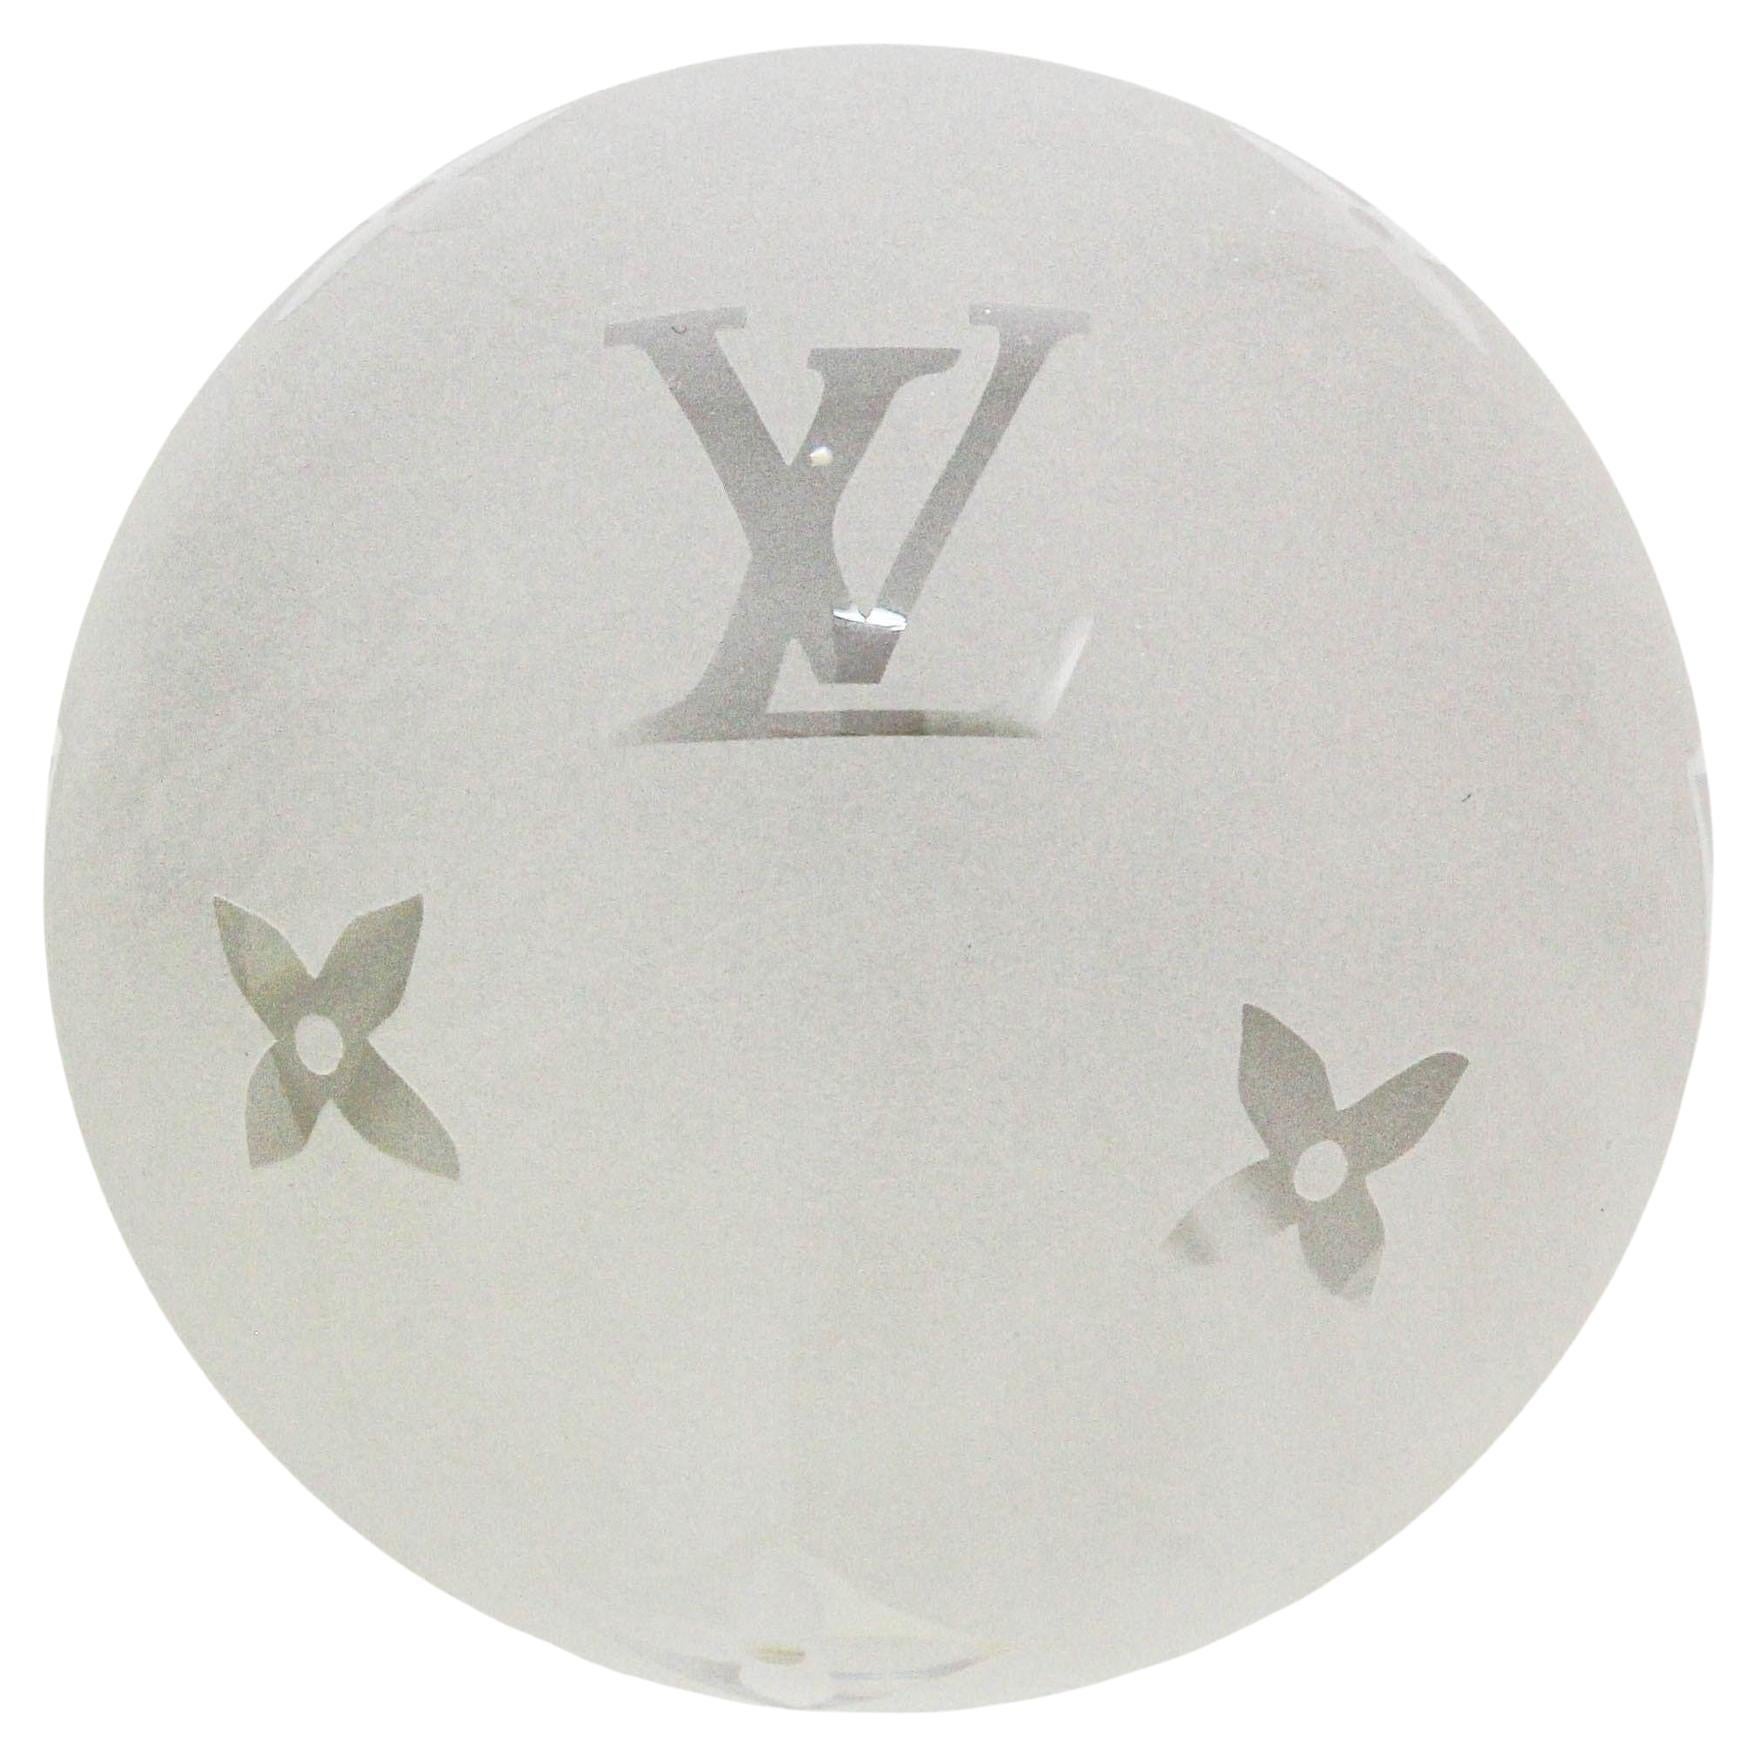 LOUIS VUITTON Paperweight Monogram Clear Crystal Paper Weight